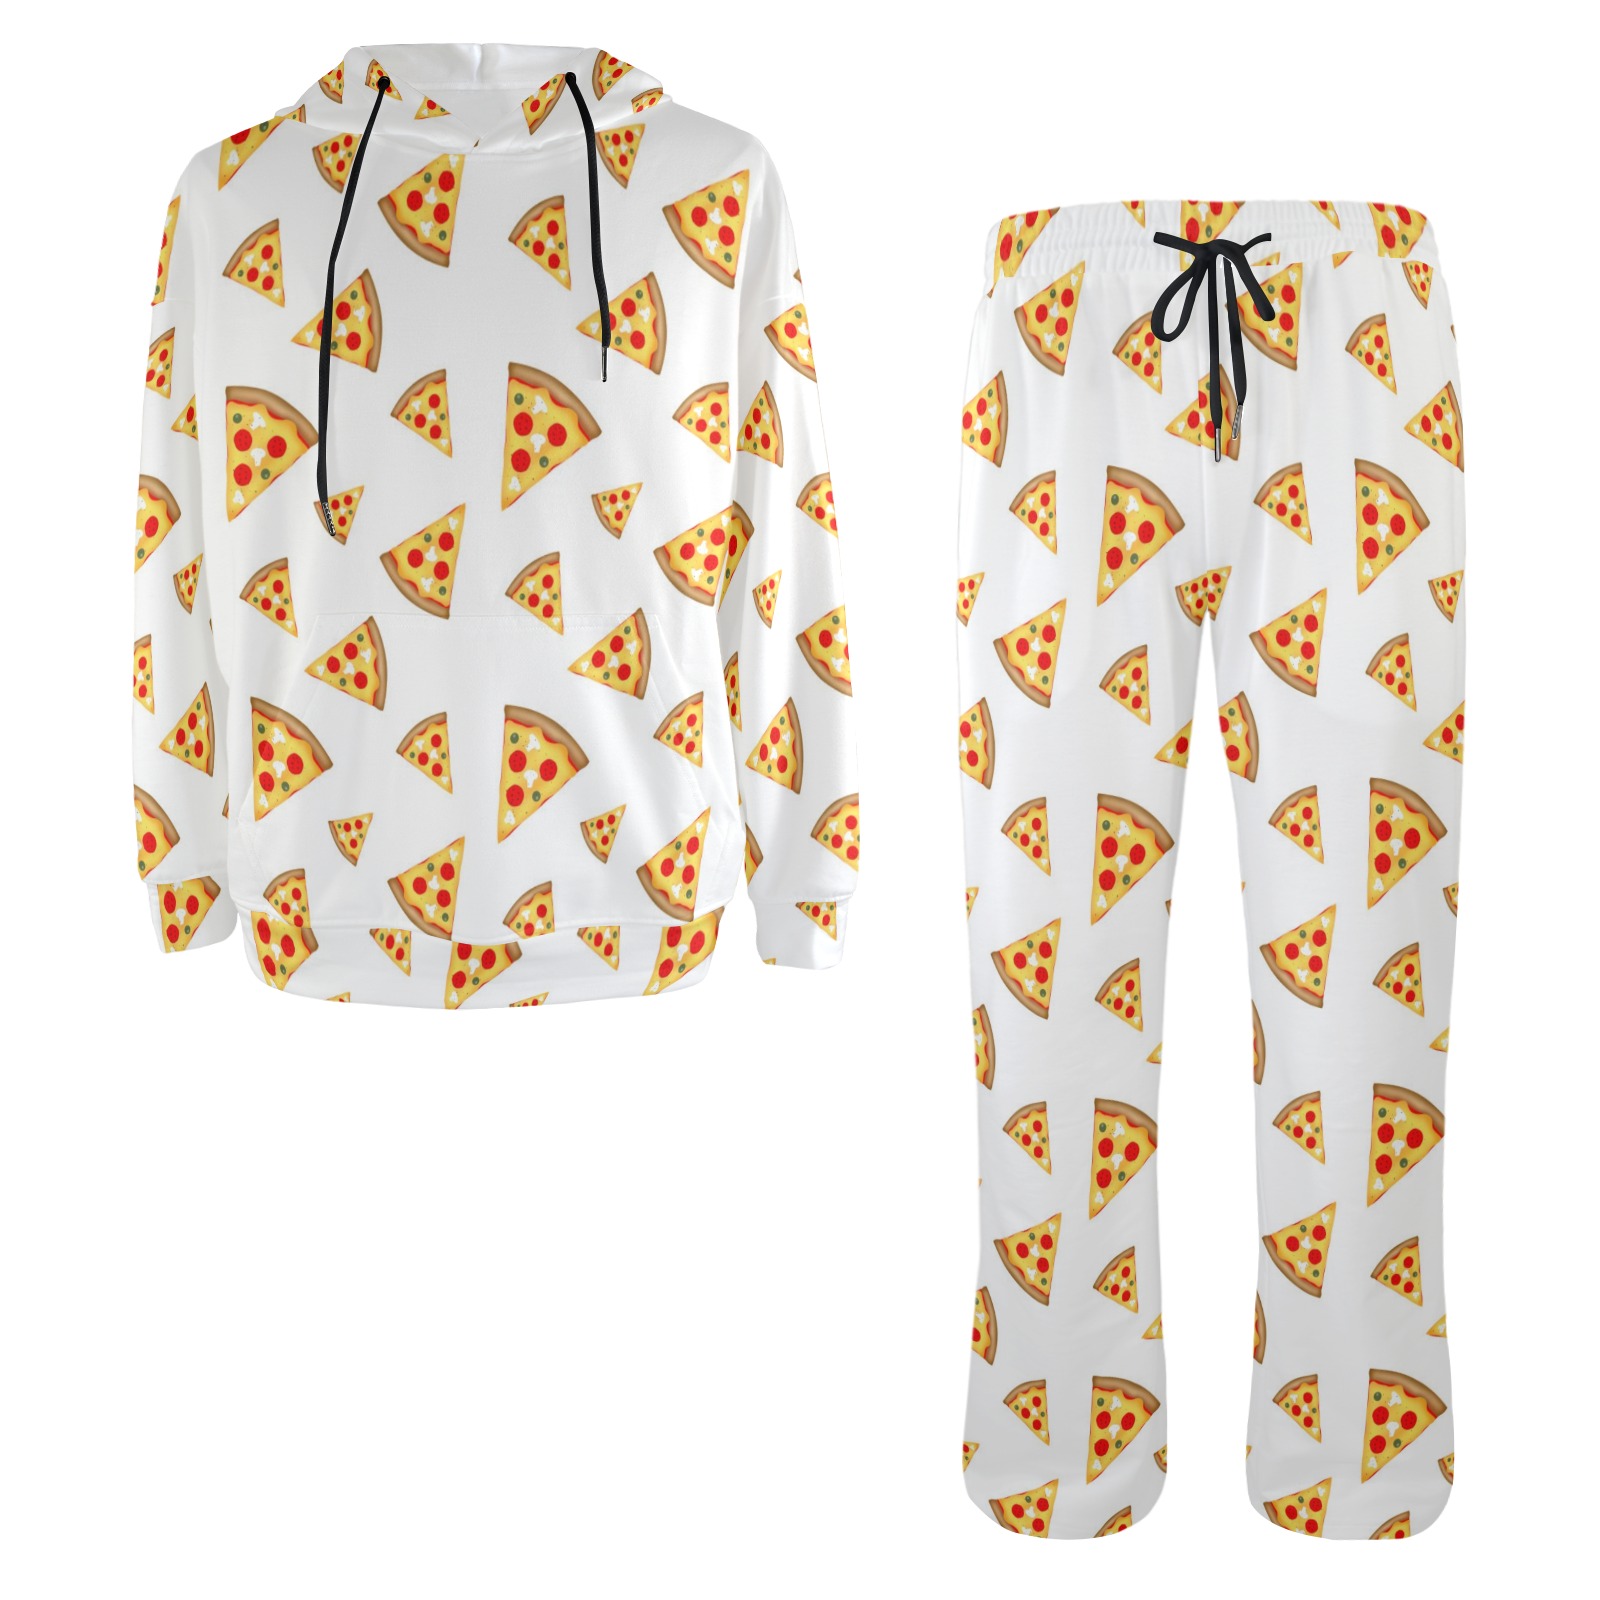 Cool and fun pizza slices pattern on white Men's Streetwear Flared Tracksuit (Set25)